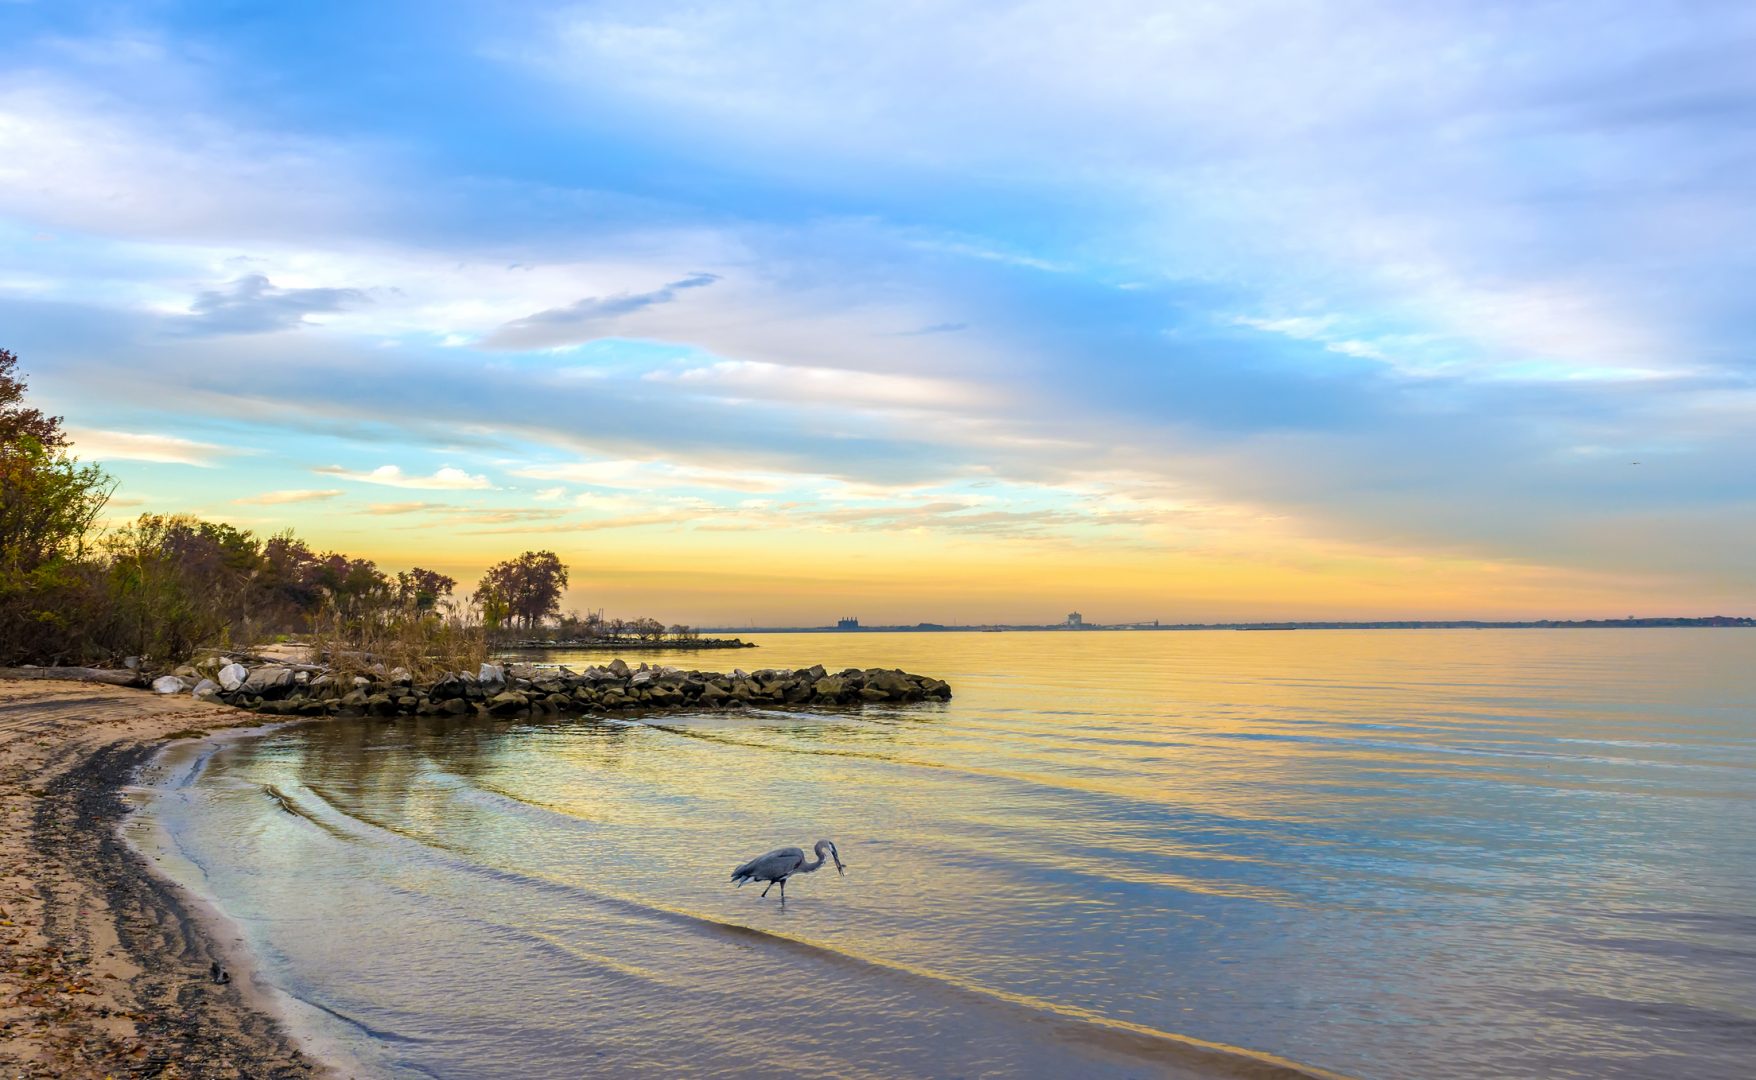 A great blue heron catching a fish on a Chesapeake Bay beach at sunset.